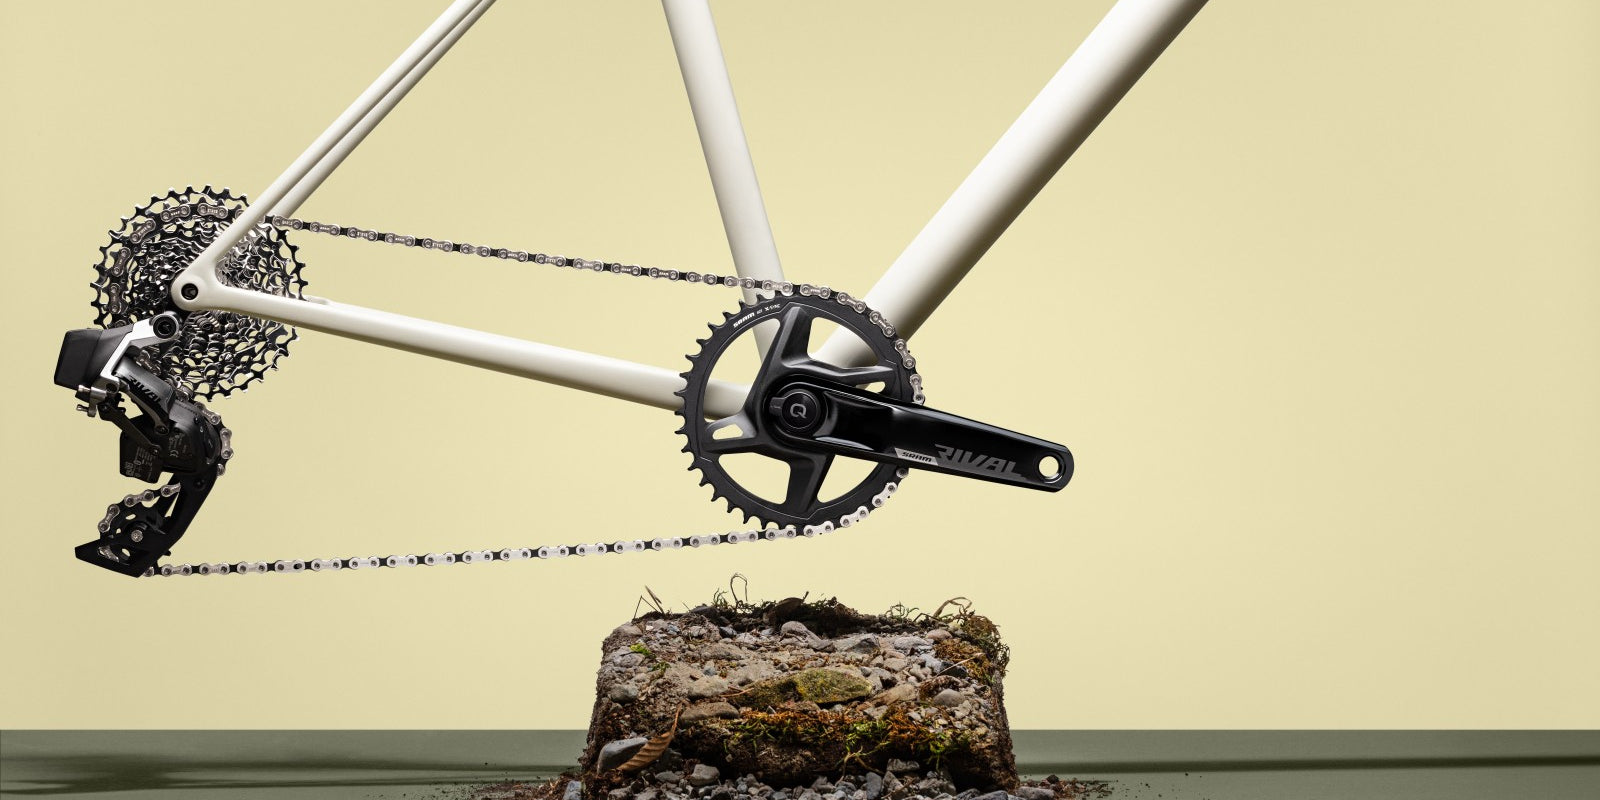 Detailed view of a bicycle's crankset and chain, mounted on a white bike frame against a pale yellow backdrop @ Bici.